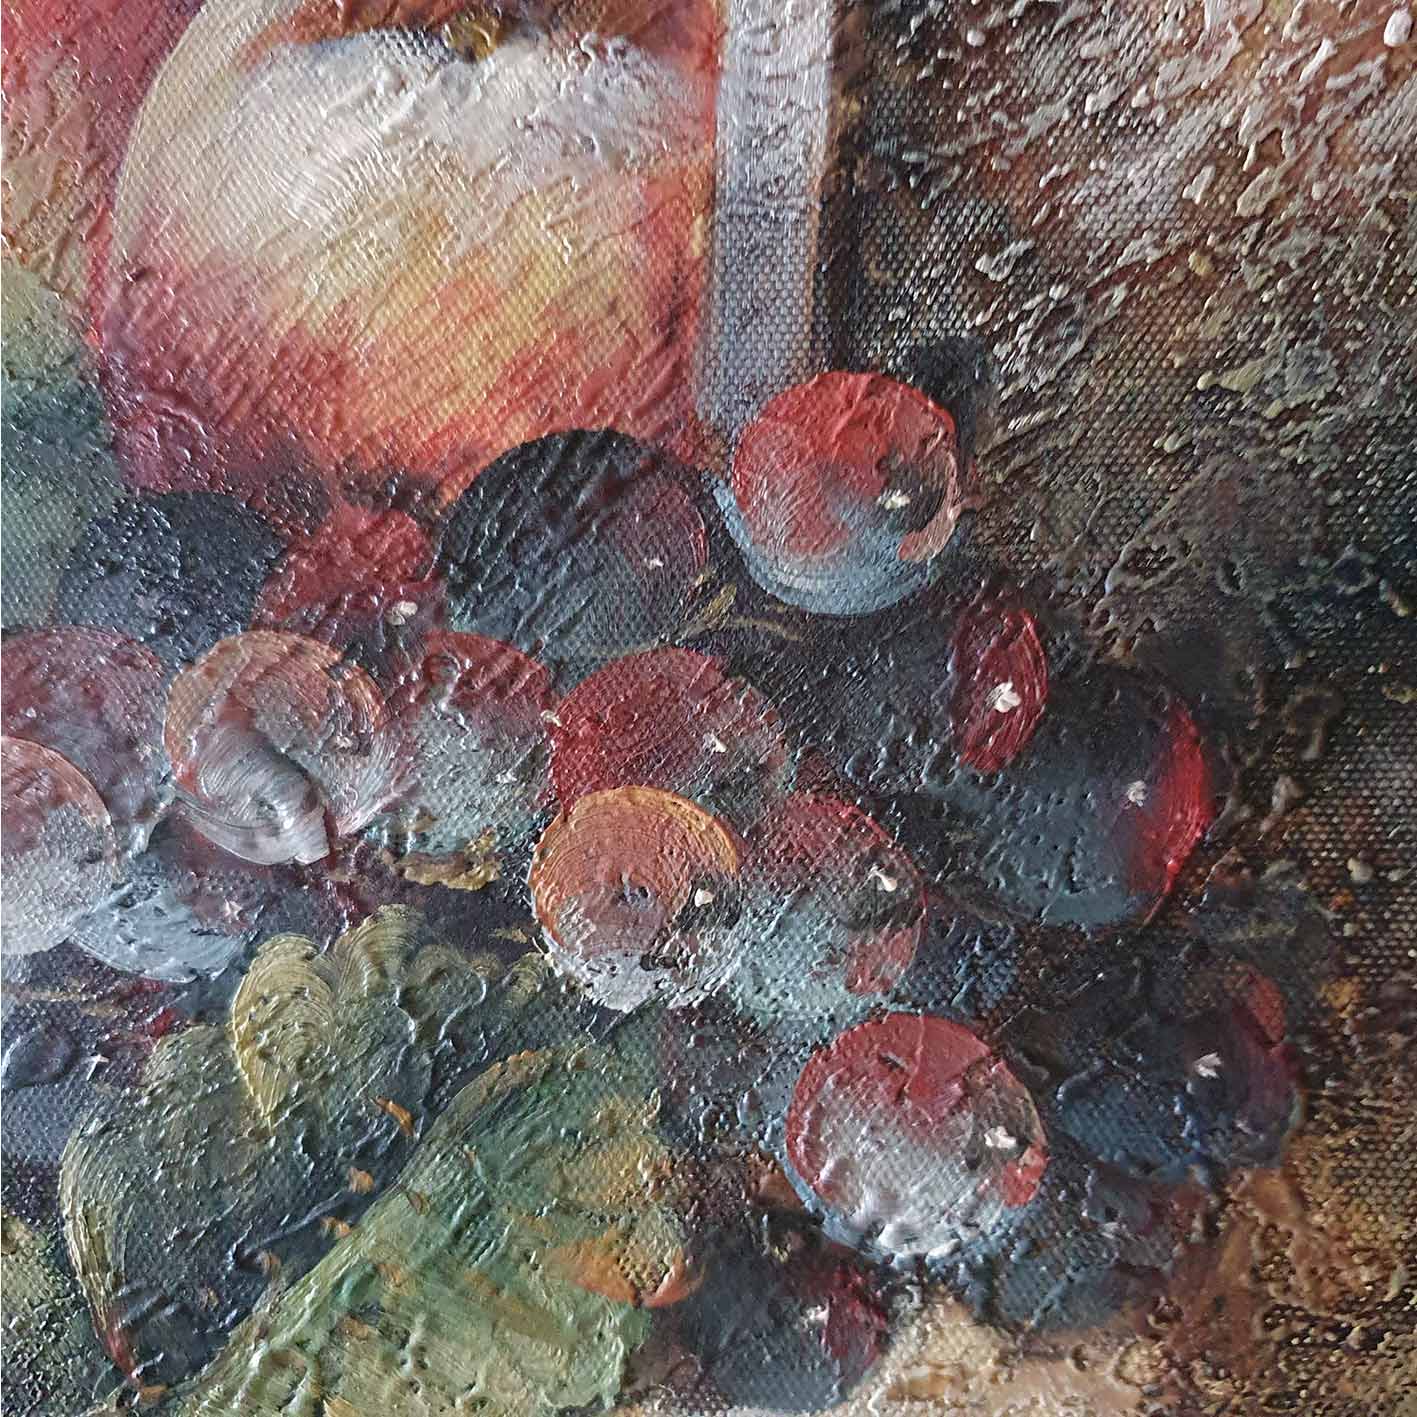 Fruit Still Life Diptych Painting 60x50 cm [2 pieces]